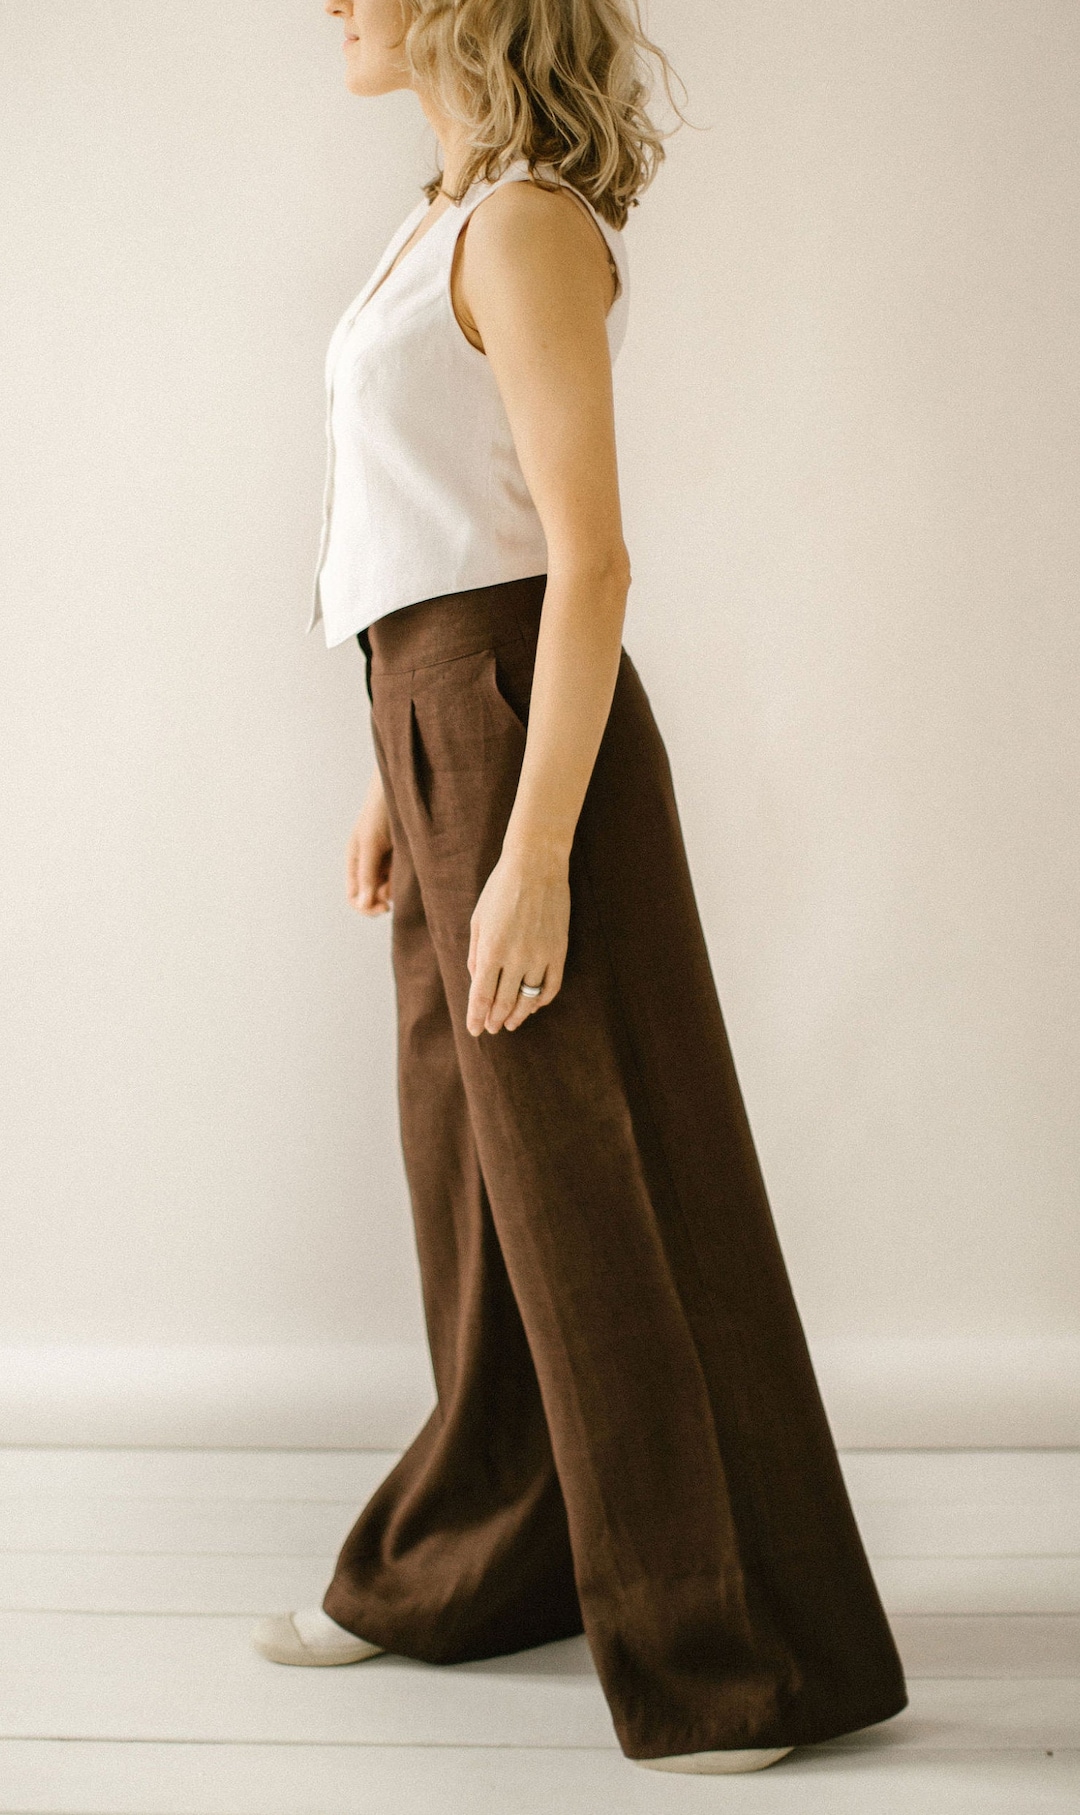 Olive green linen casual look palazzo pant - G3-WFP38 | G3fashion.com